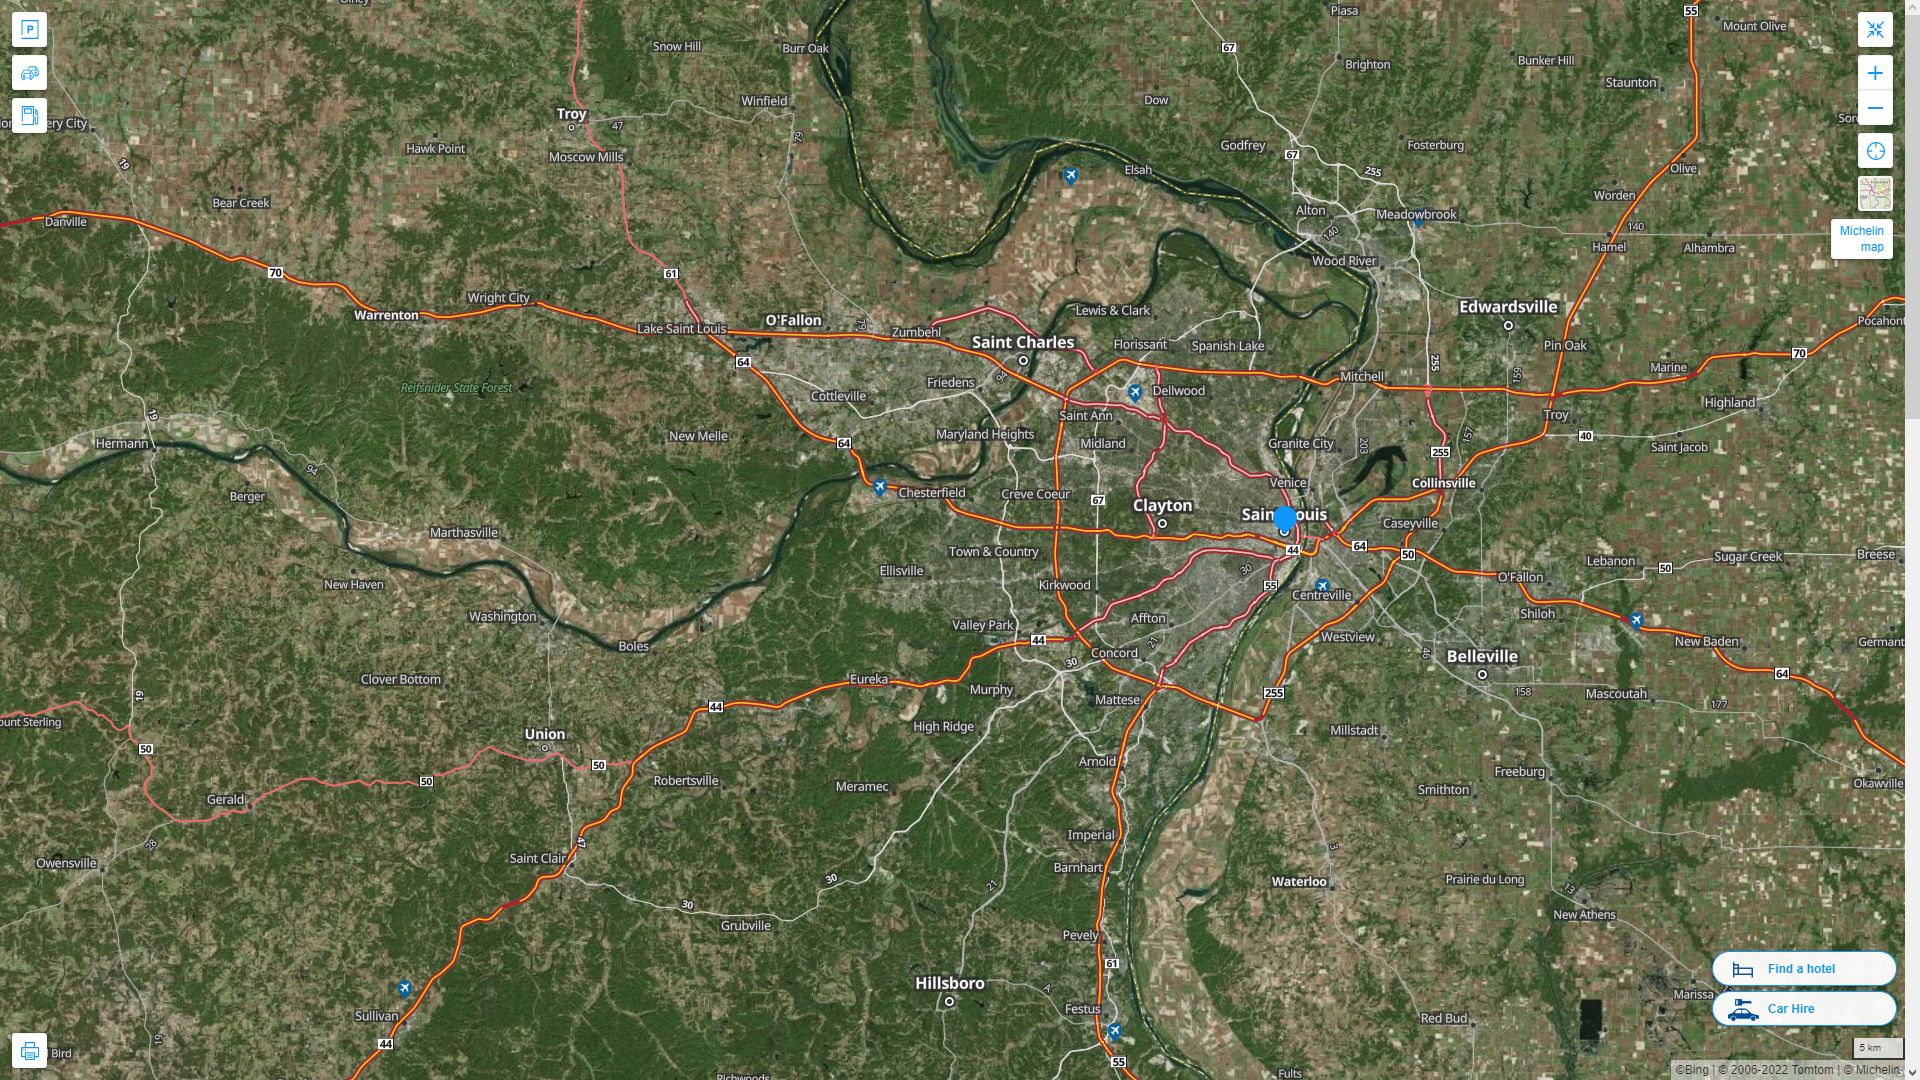 St. Louis Missouri Highway and Road Map with Satellite View